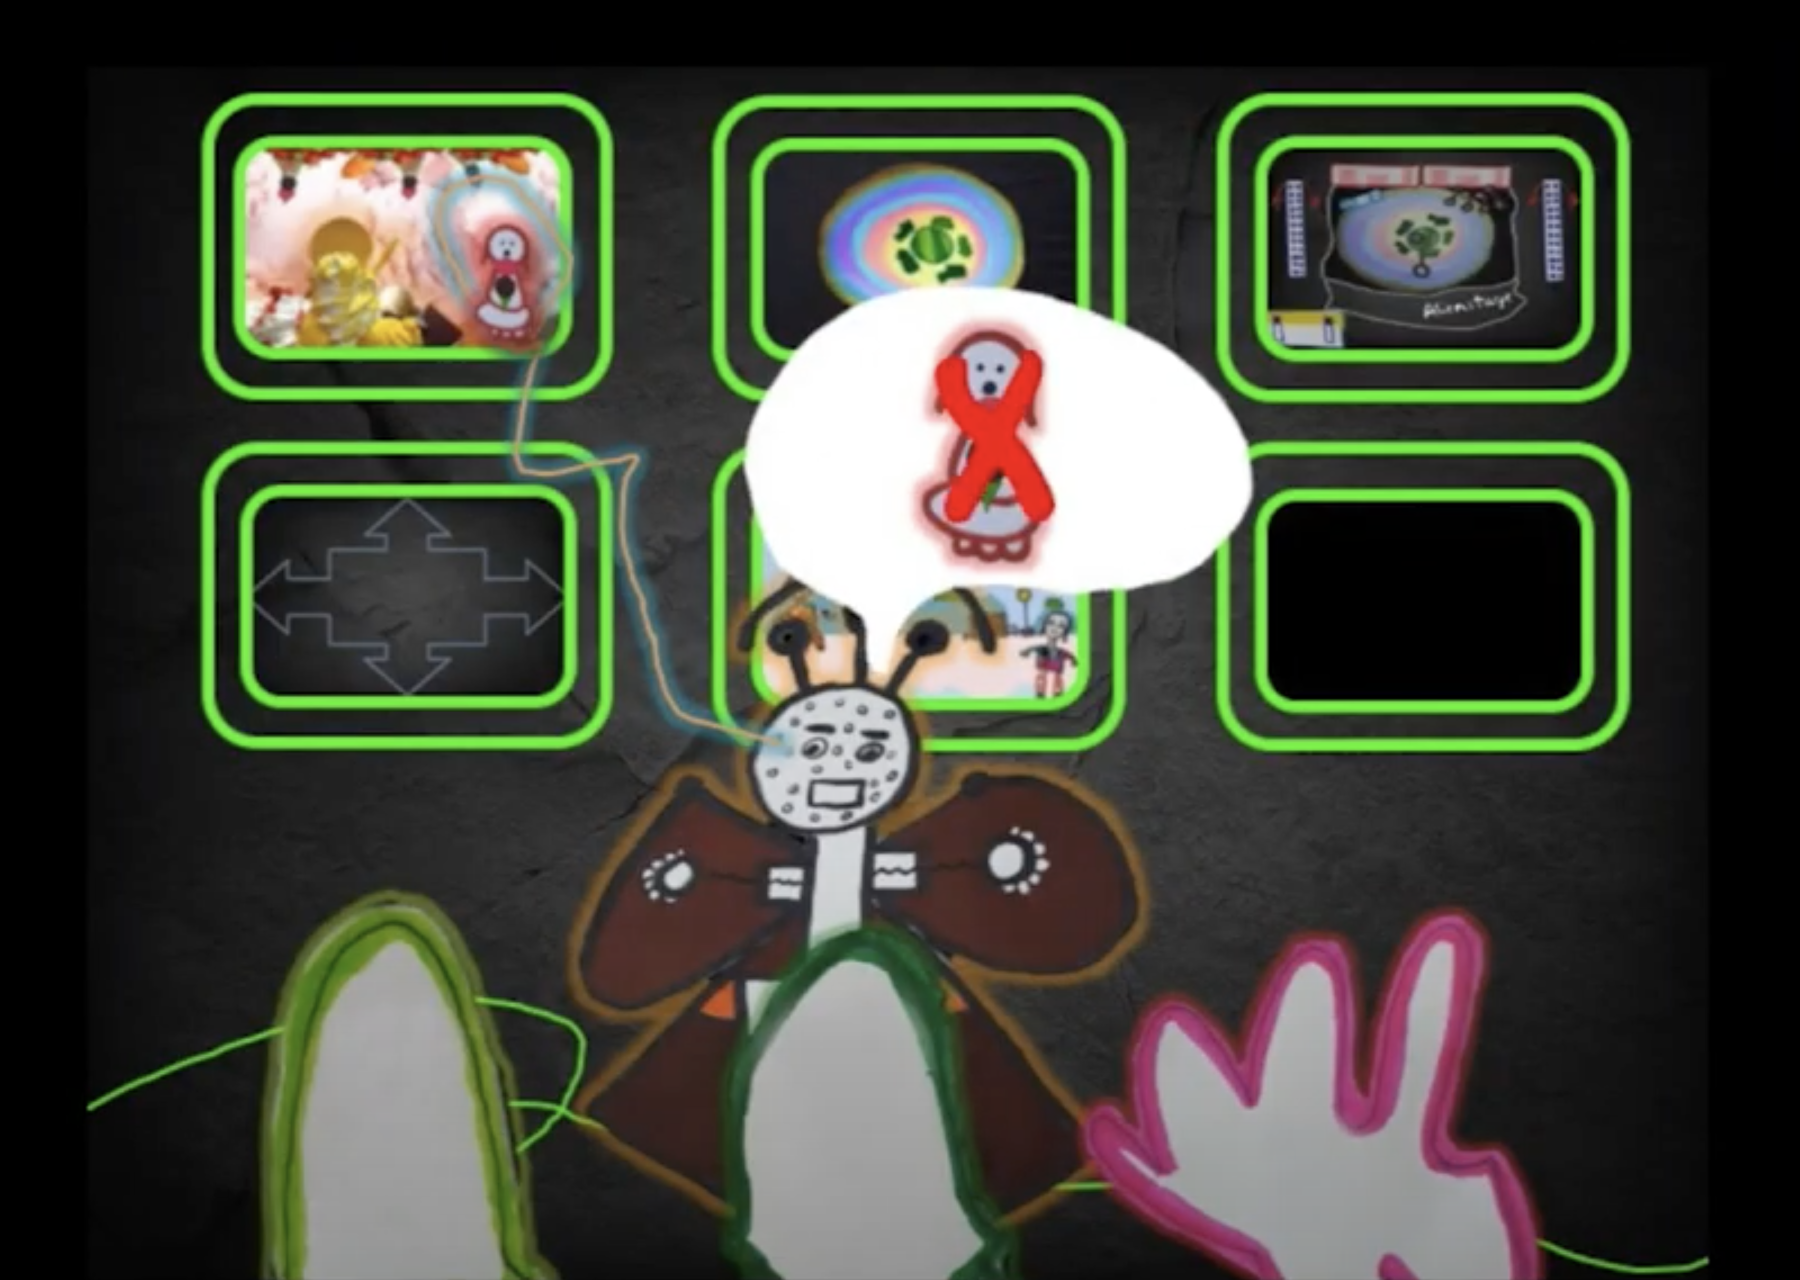 An alien with three antennae on his head wearing a brown robe. He is facing three aliens and with a speech bubble above his head. In the speech bubble, alien Faraway is crossed out in red. Behind him are six screens showing other planets.